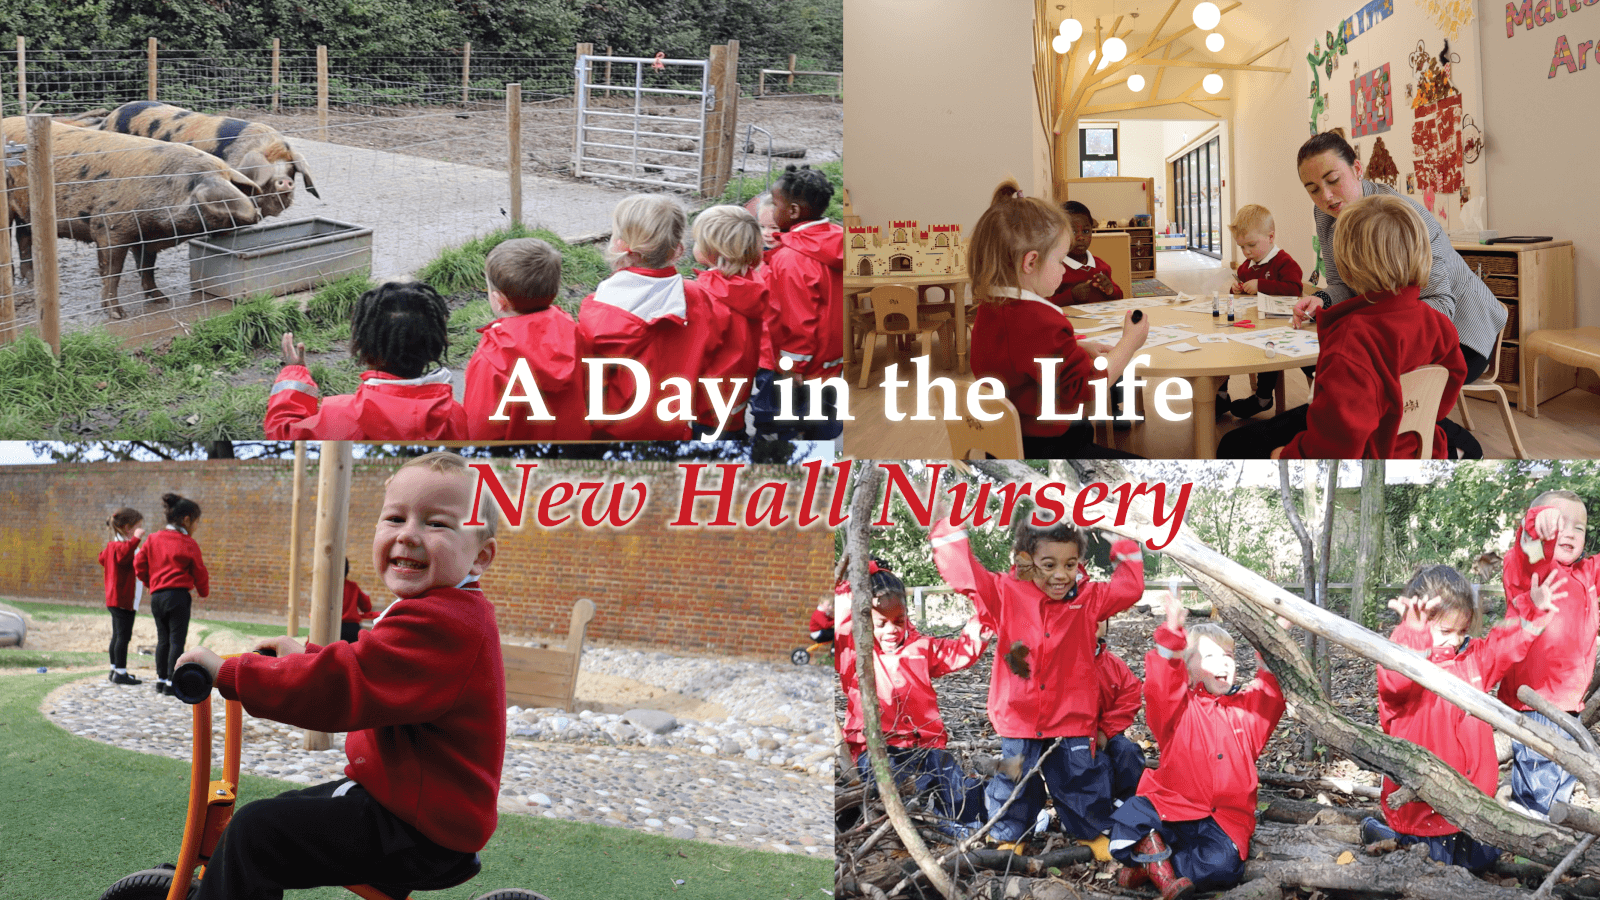 New Hall Nursery: A Day in the Life (ages 3-4)